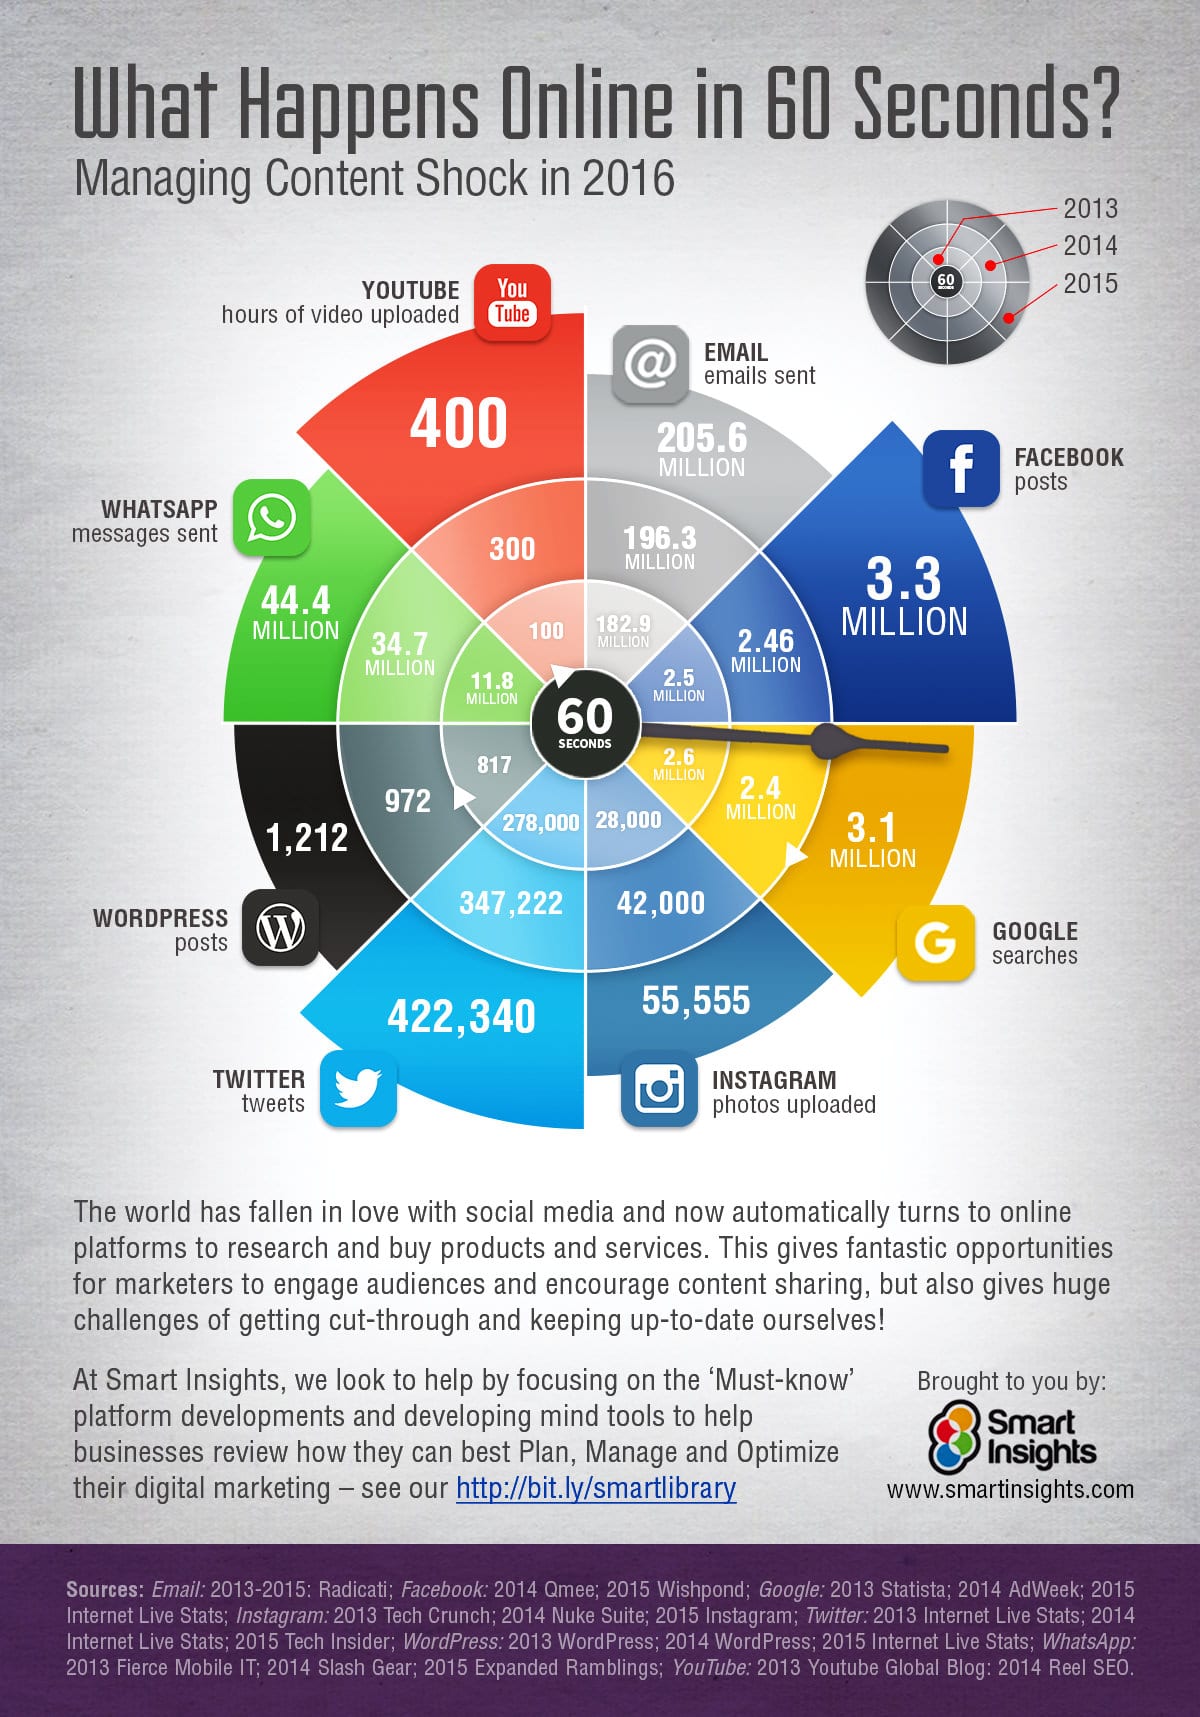 Our compilation of what happens in social media every minute / 60 seconds